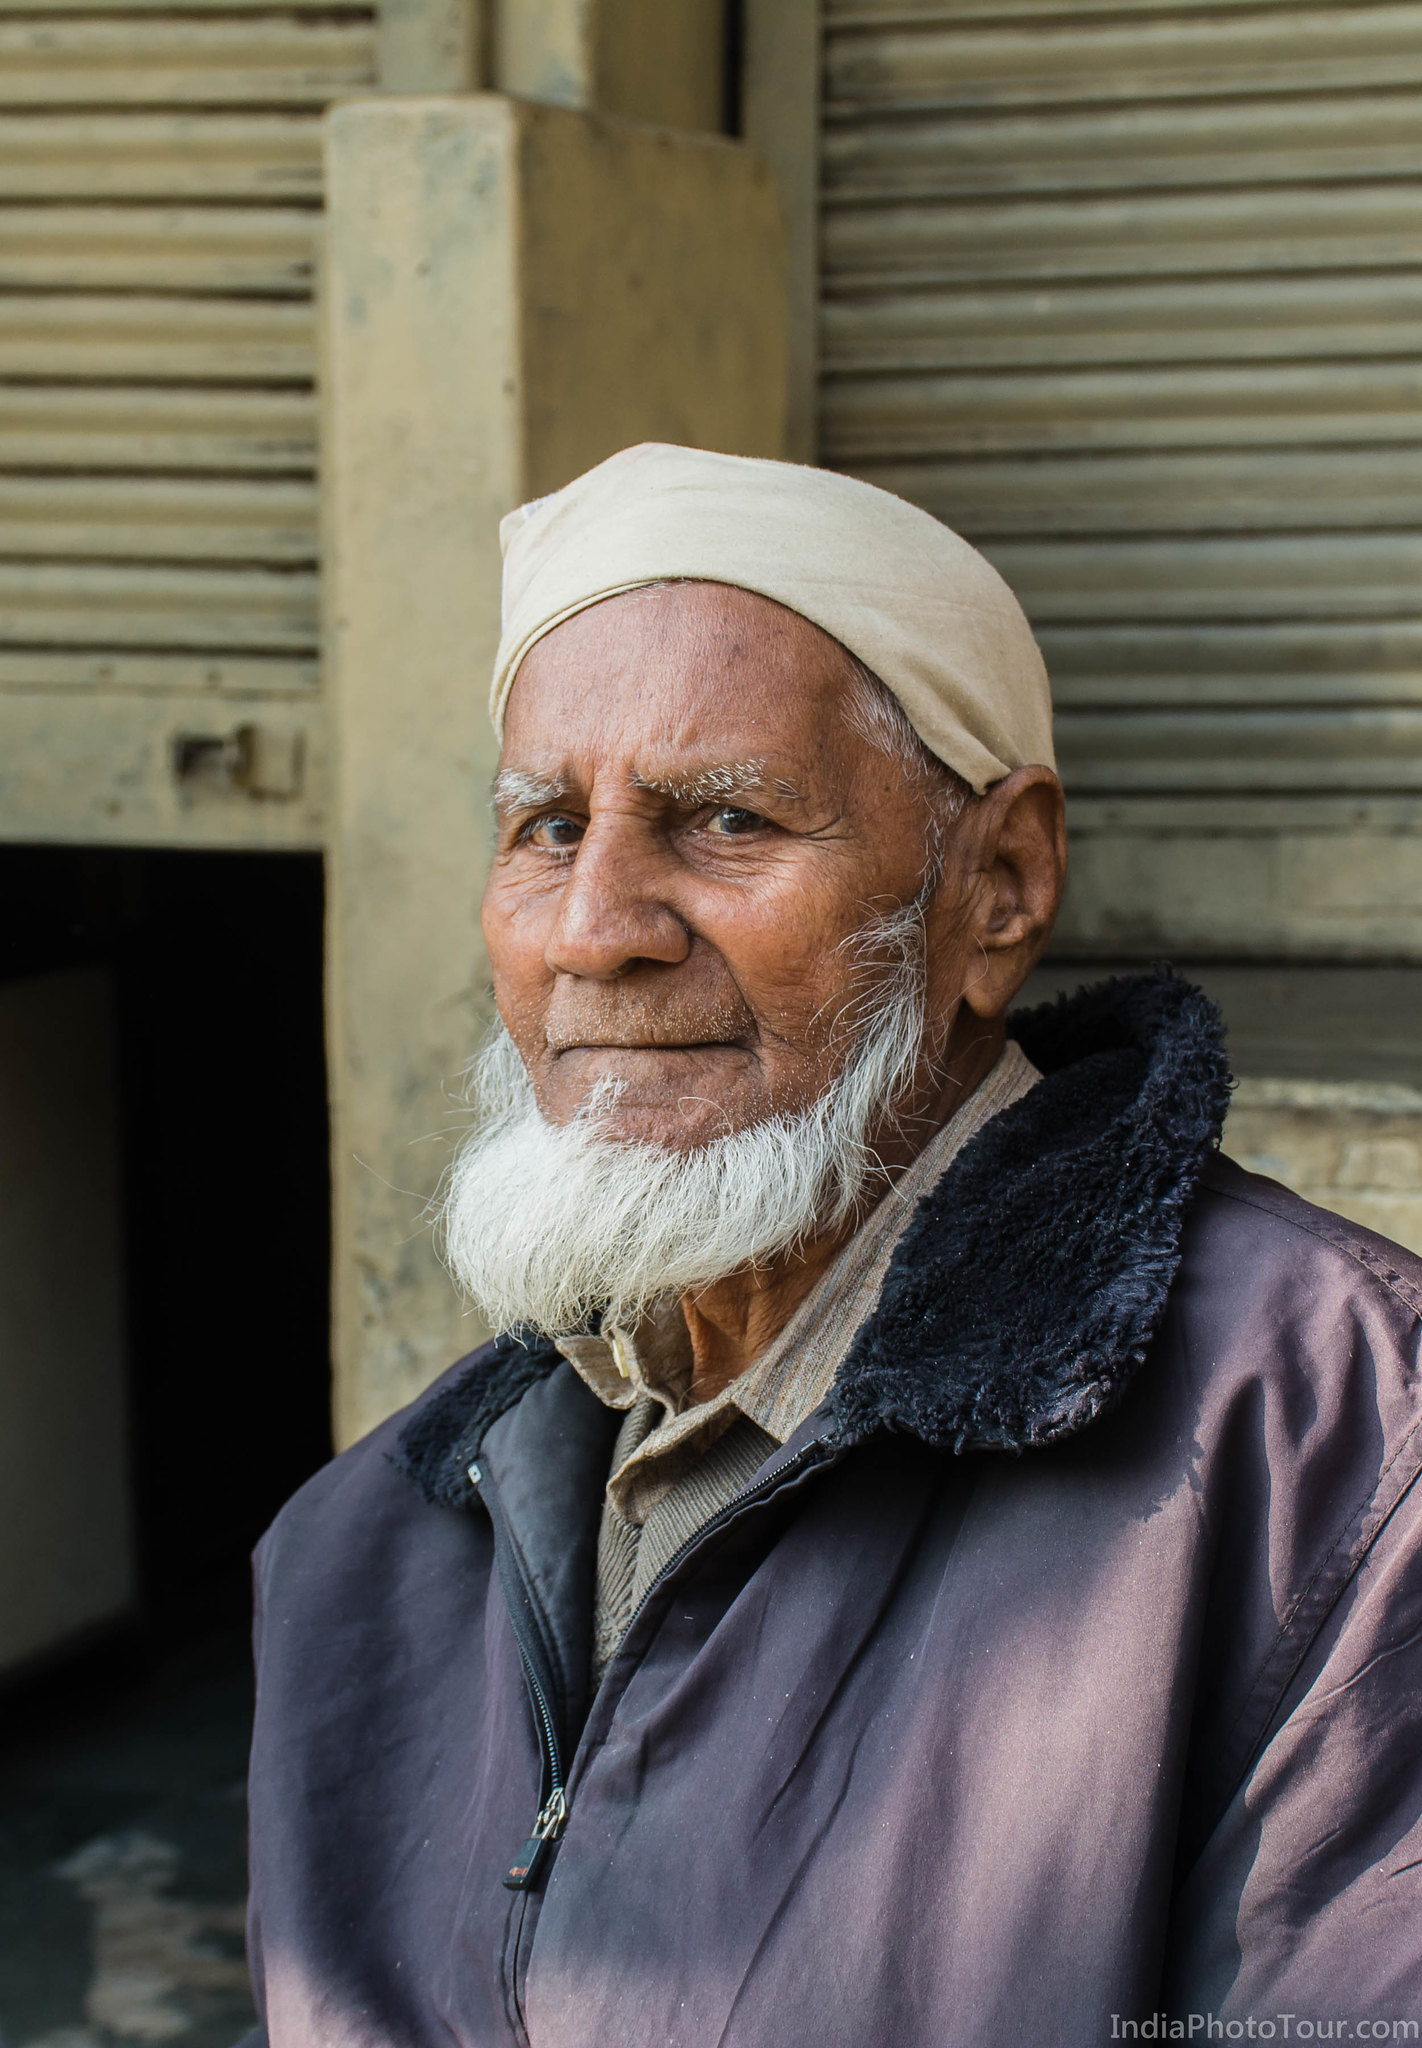 A local resident of Old Delhi posing for a picture